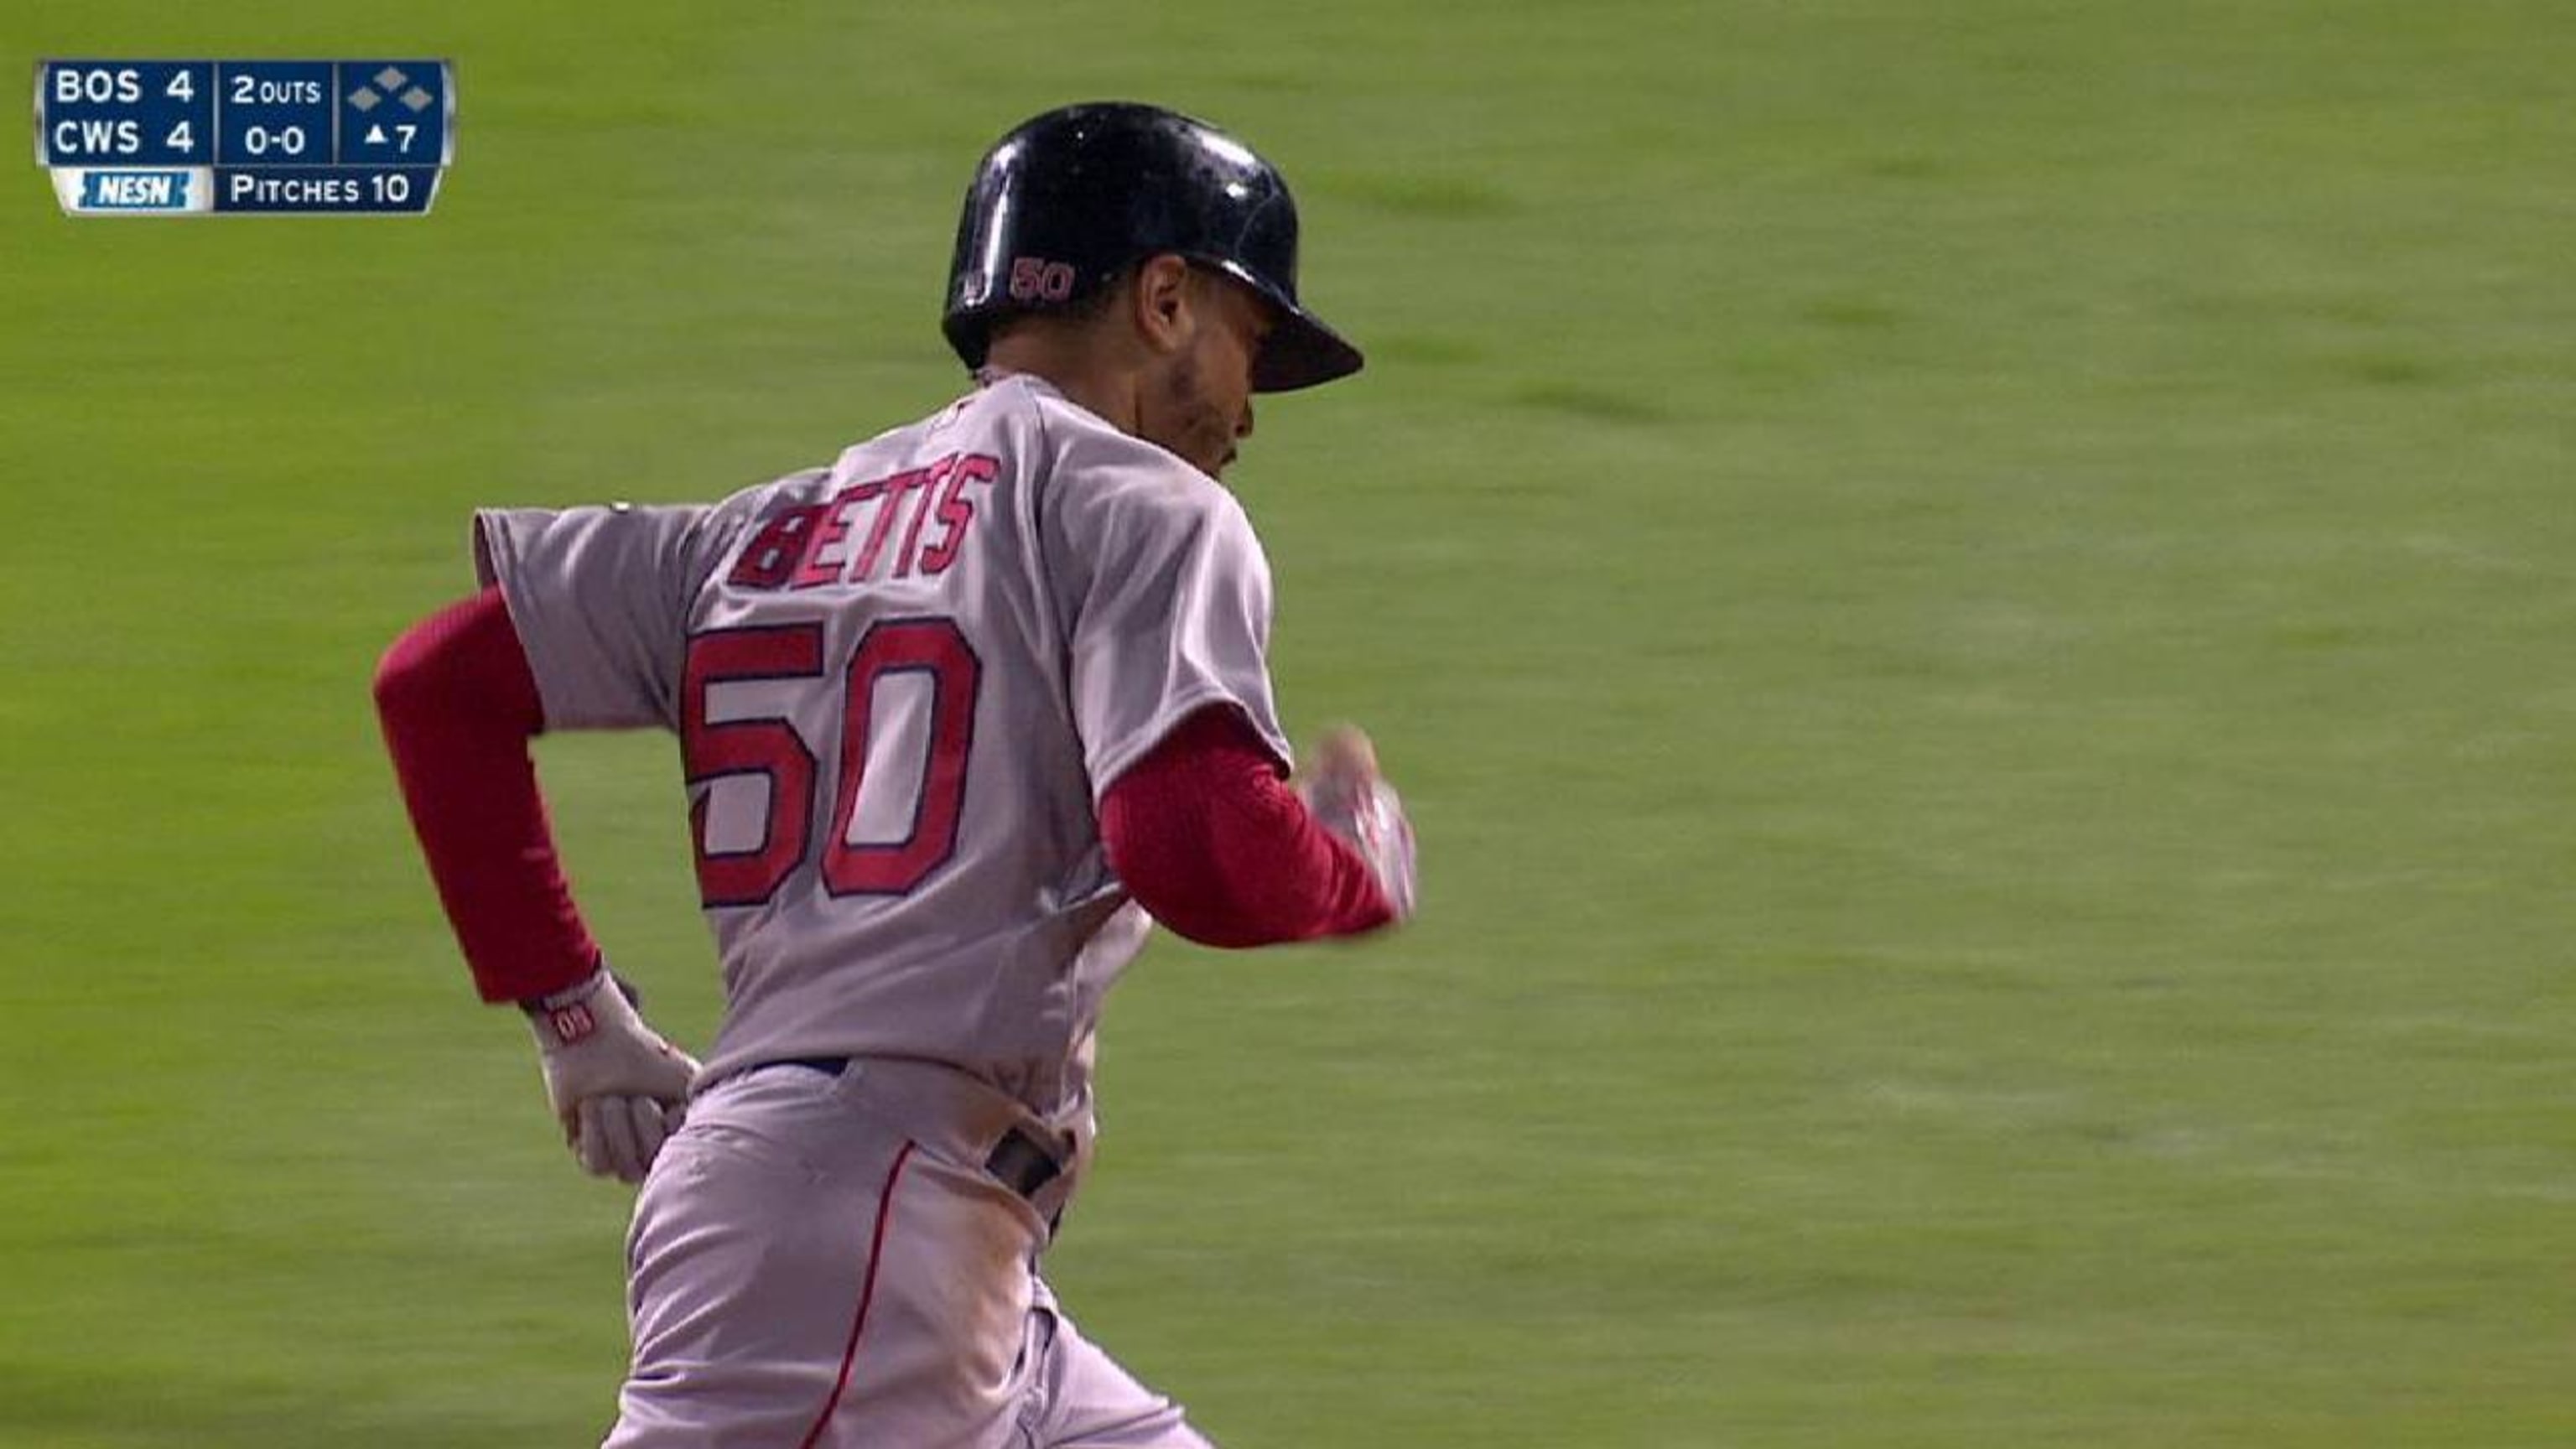 Red Sox 16, Angels 4: J.D. Martinez, Mookie Betts power Boston to victory